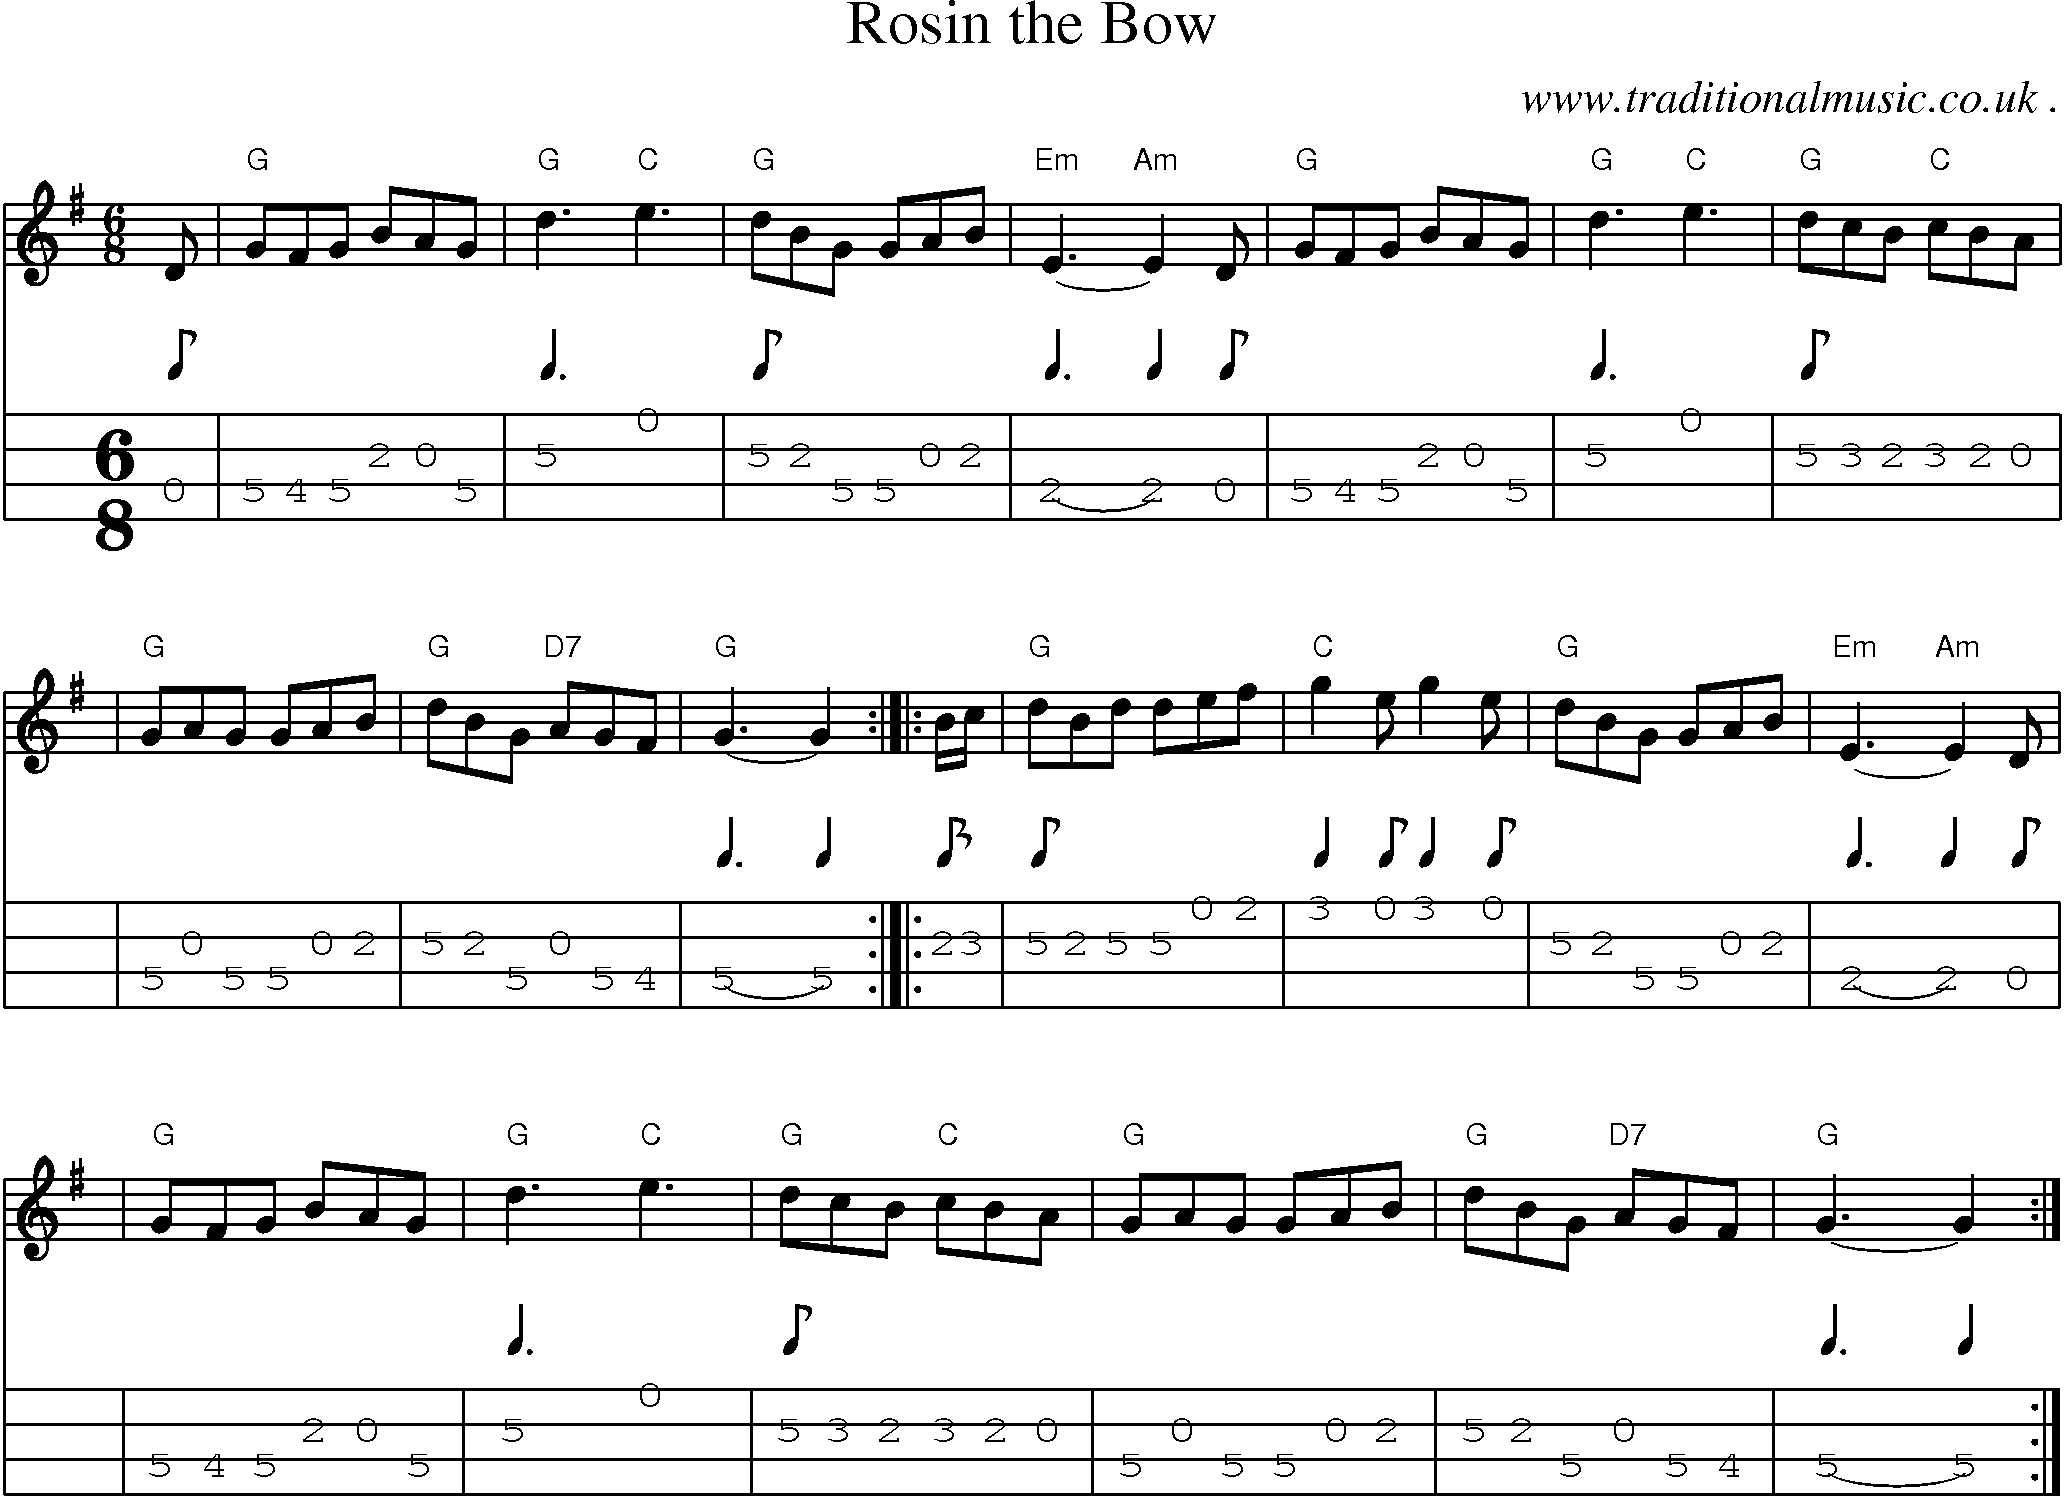 Sheet-music  score, Chords and Mandolin Tabs for Rosin The Bow